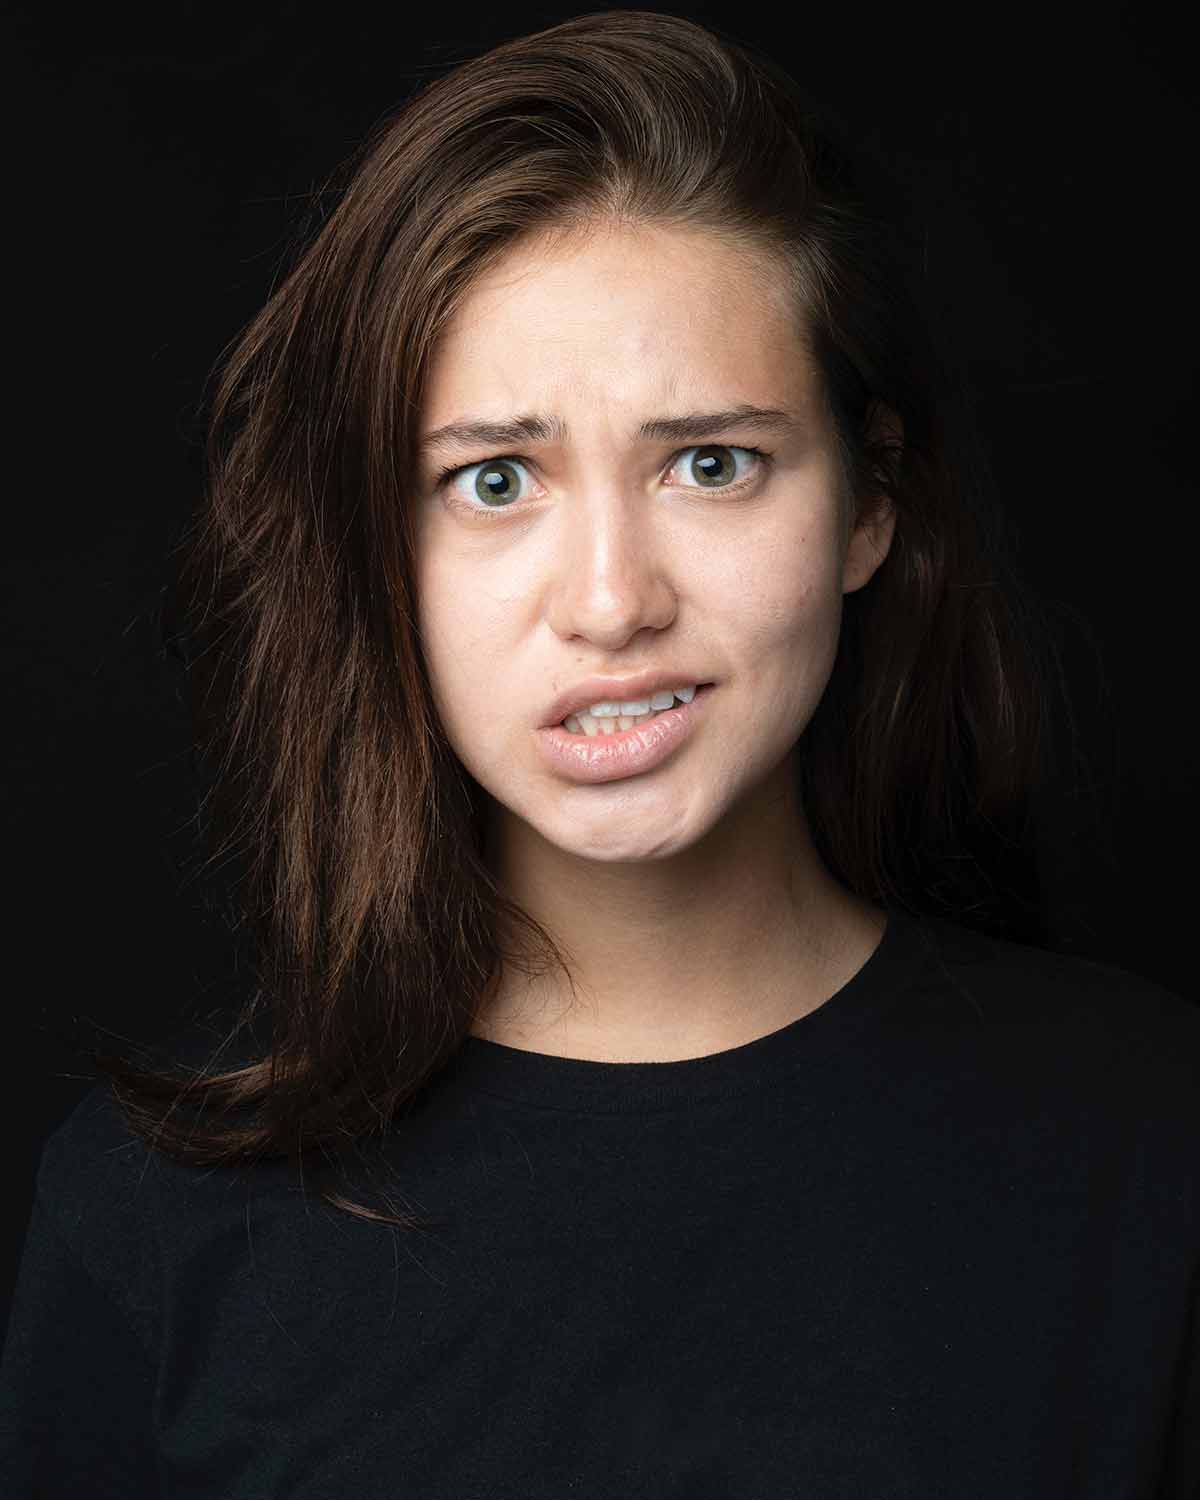 A photo of a girl looking confused.